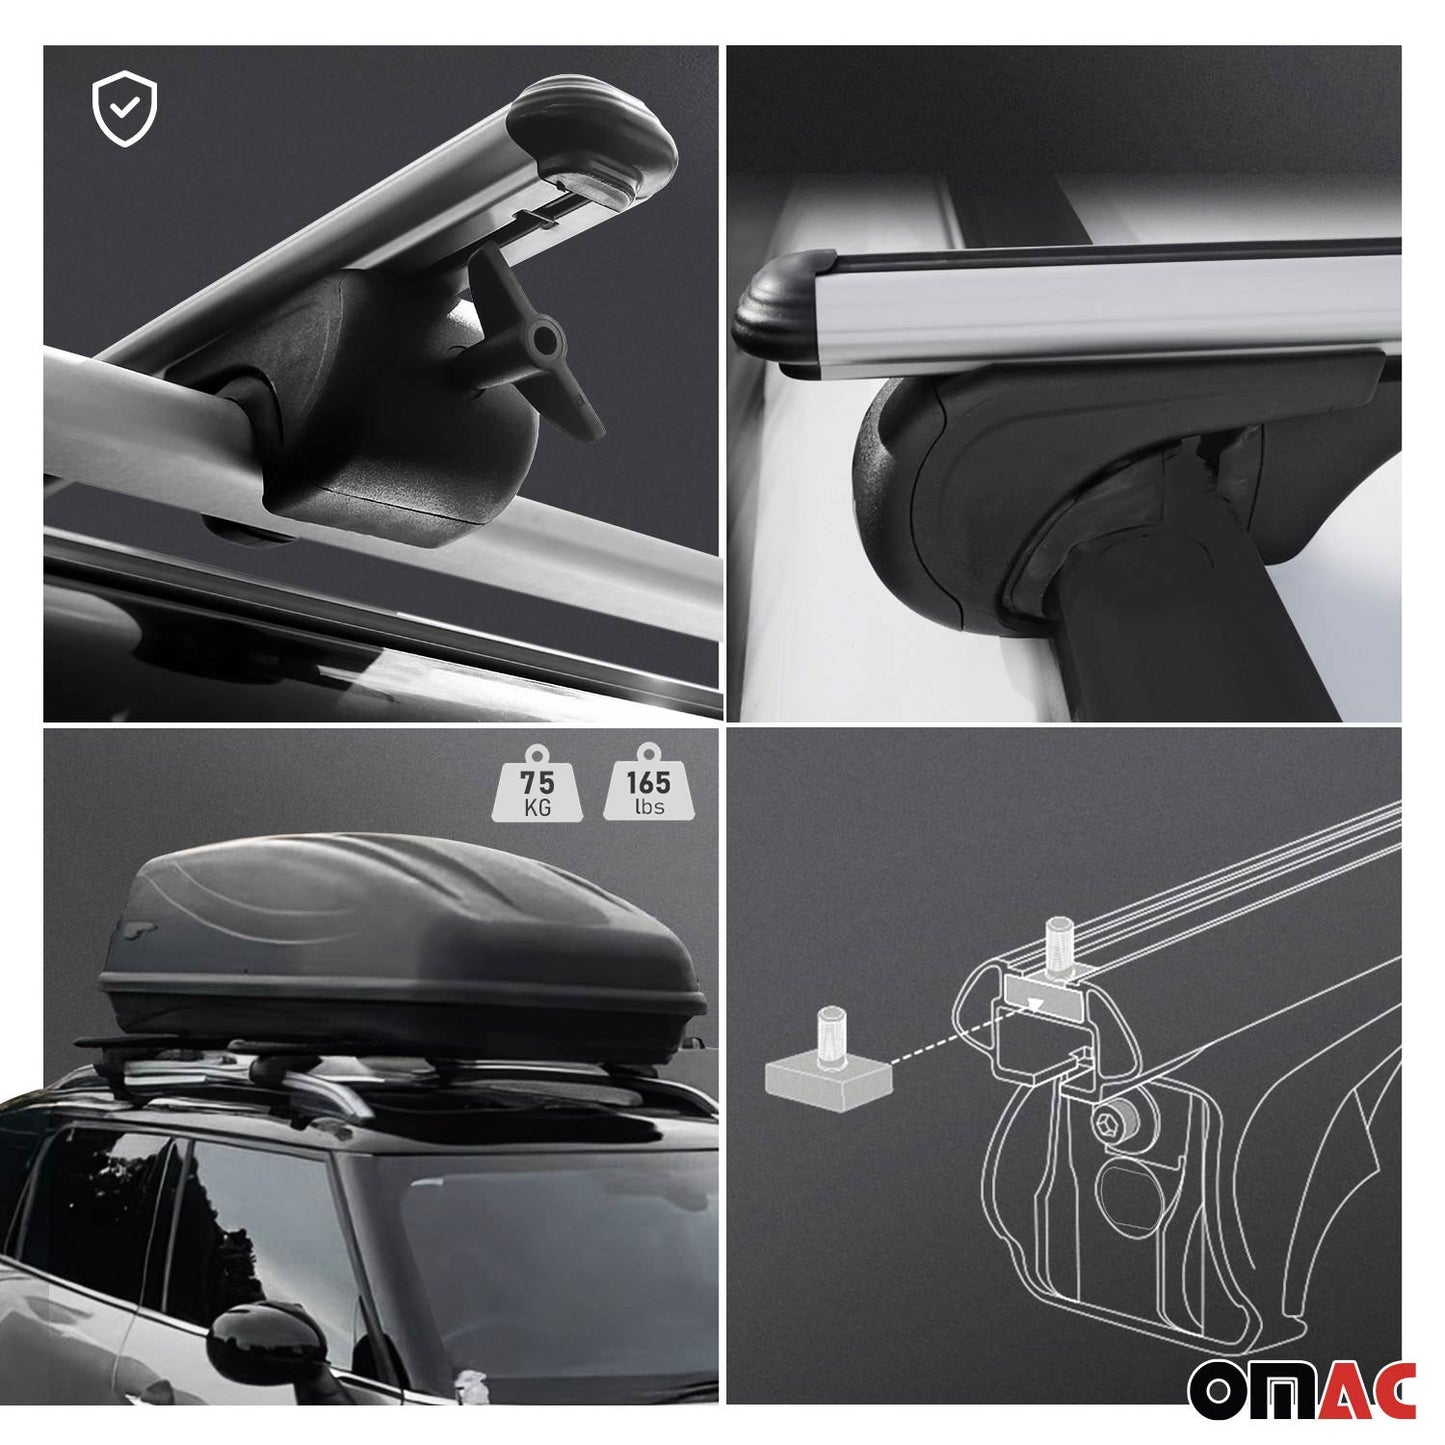 OMAC Lockable Roof Rack Cross Bars Luggage Carrier for Infiniti FX50 2009-2013 Gray 39039696929M